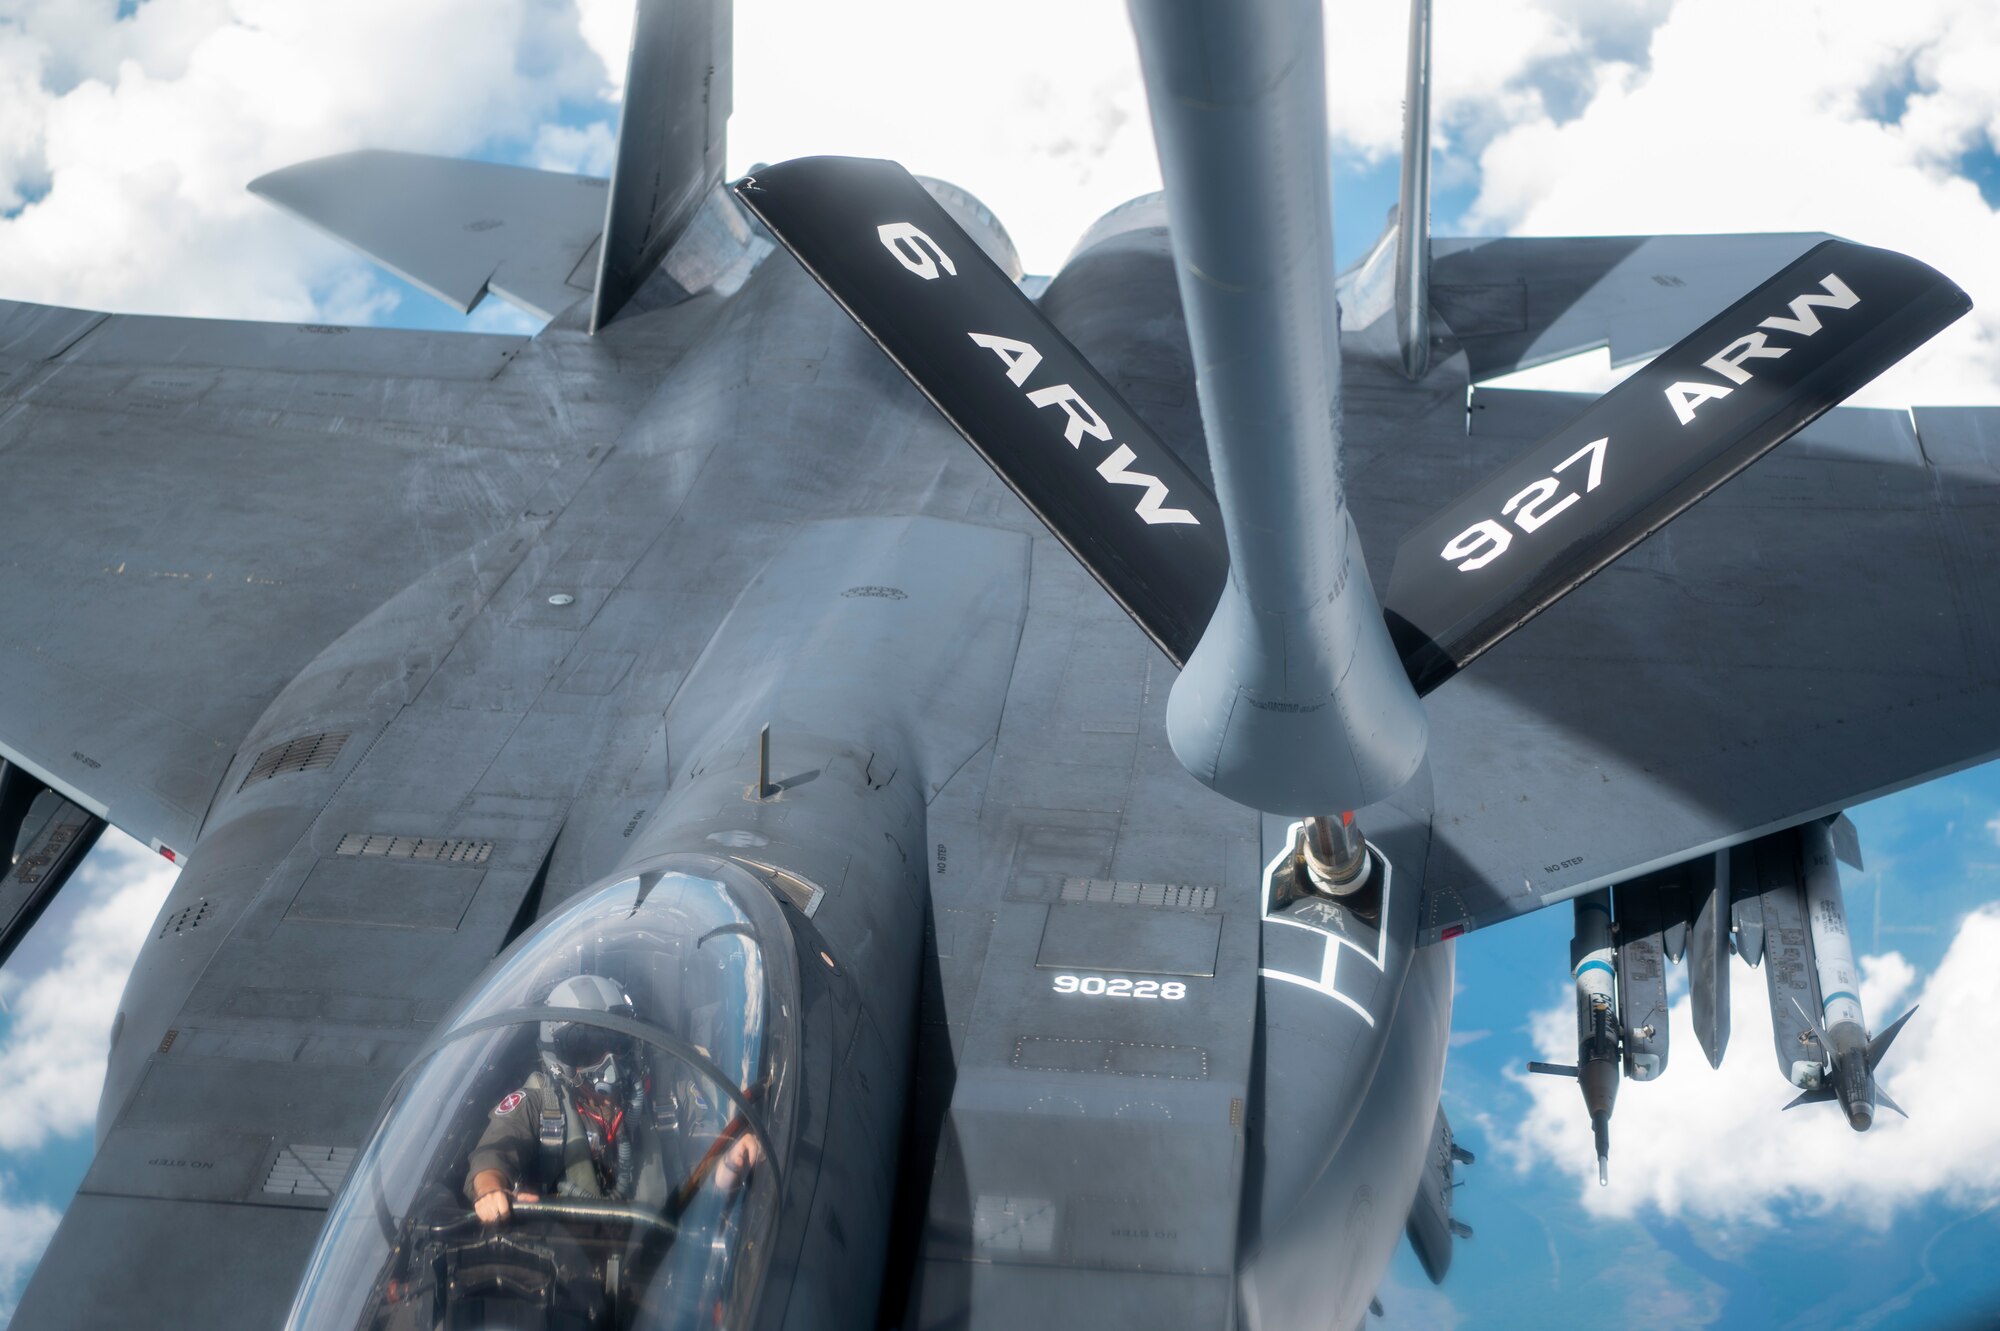 An F-15E Strike Eagle assigned to the 4th Fighter Wing receives fuel from a KC-135 Stratotanker assigned to the 91st Air Refueling Squadron over the Northeastern U.S. Aug. 24, 2022.